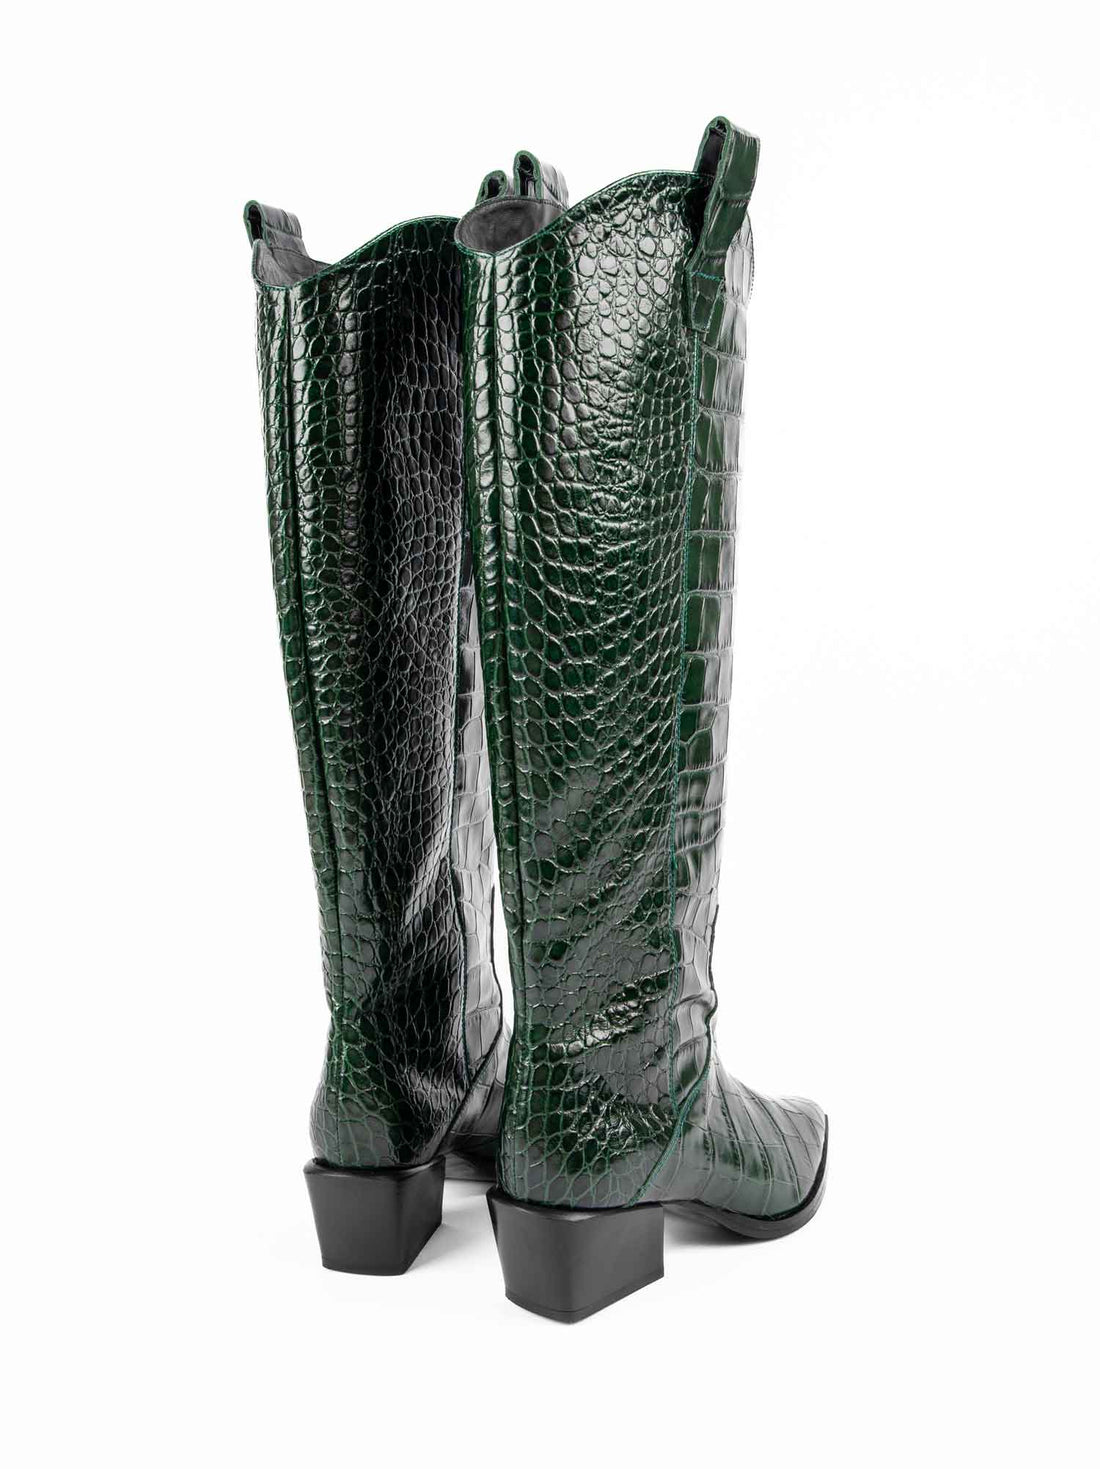 LUZ12 CROCO-EMBOSSED LEATHER HEEL TALL BOOTS